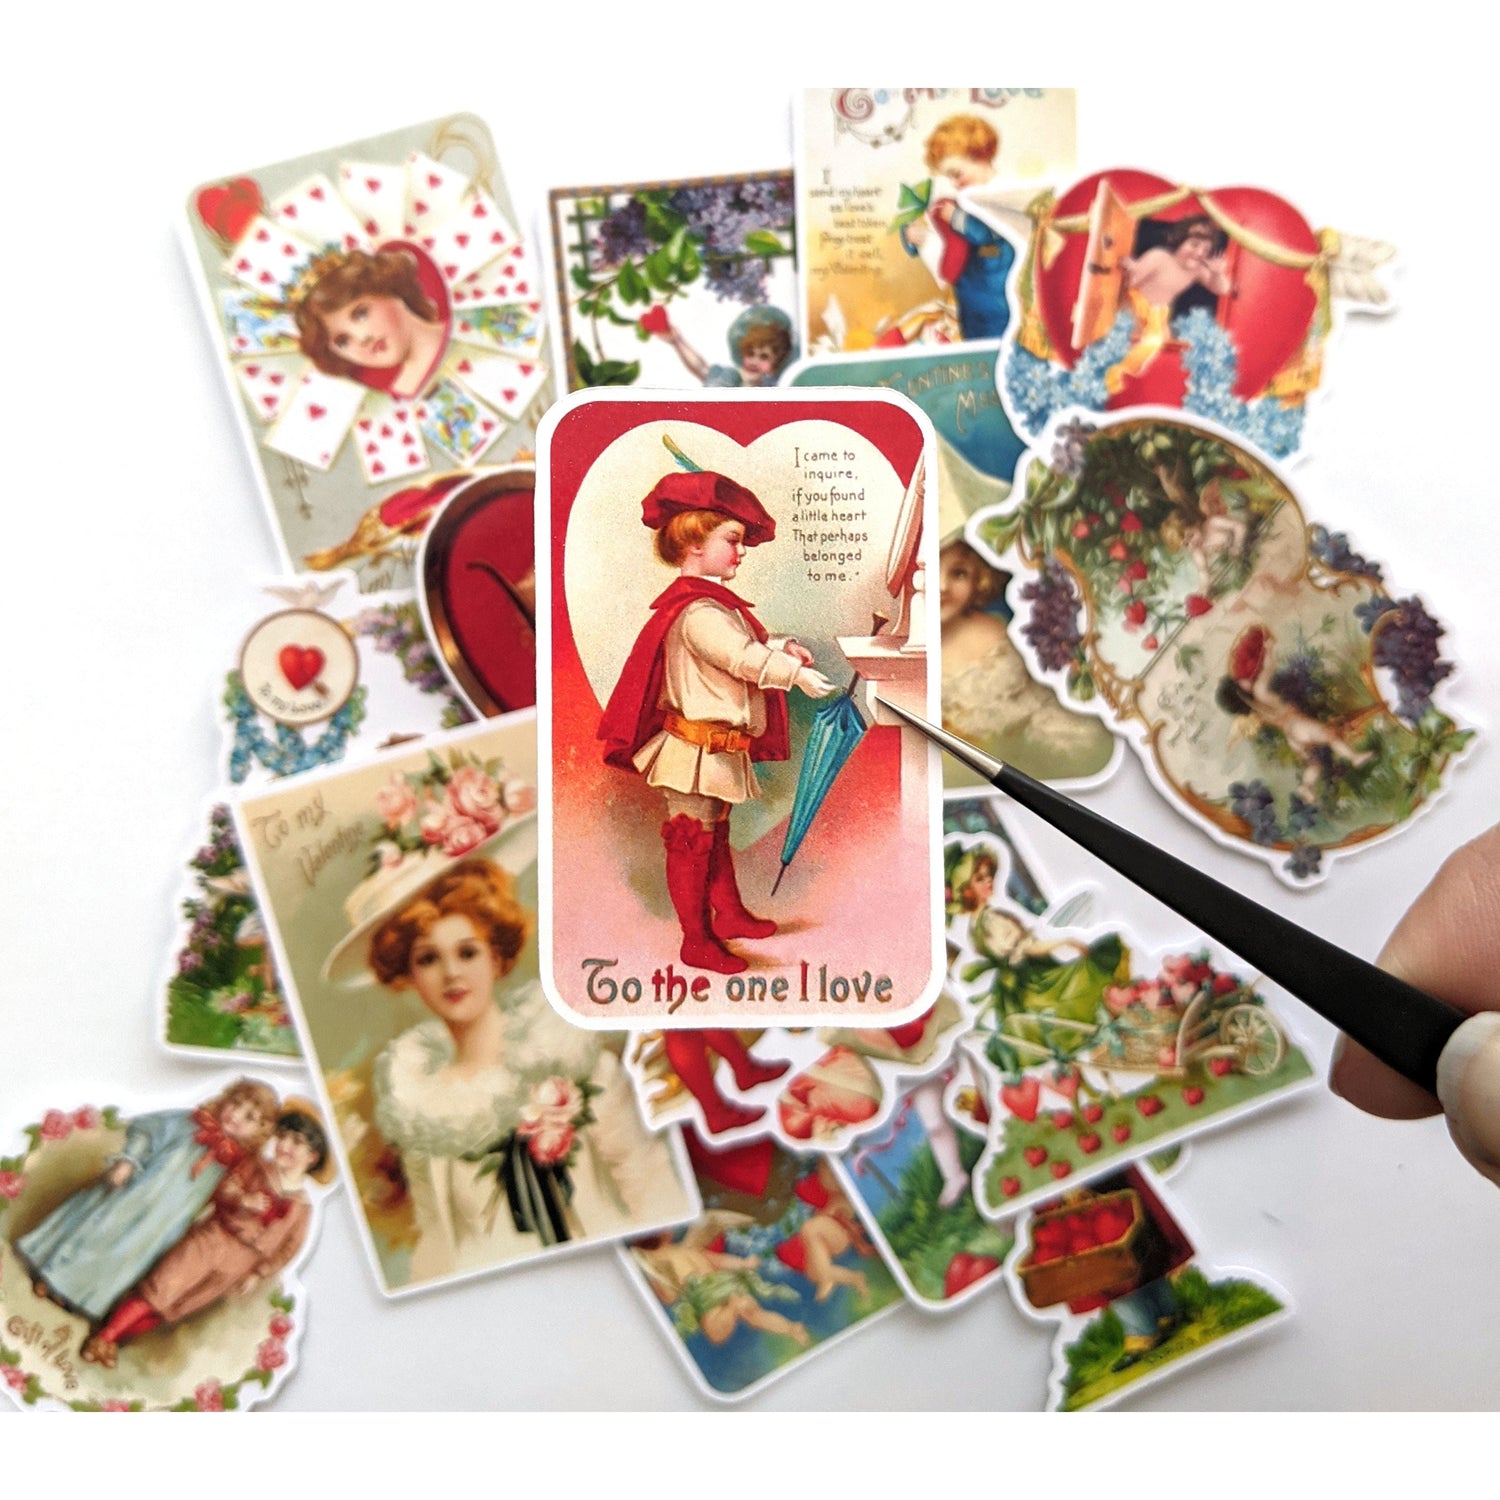 Victorian Fashion Stickers Pack – Papergame